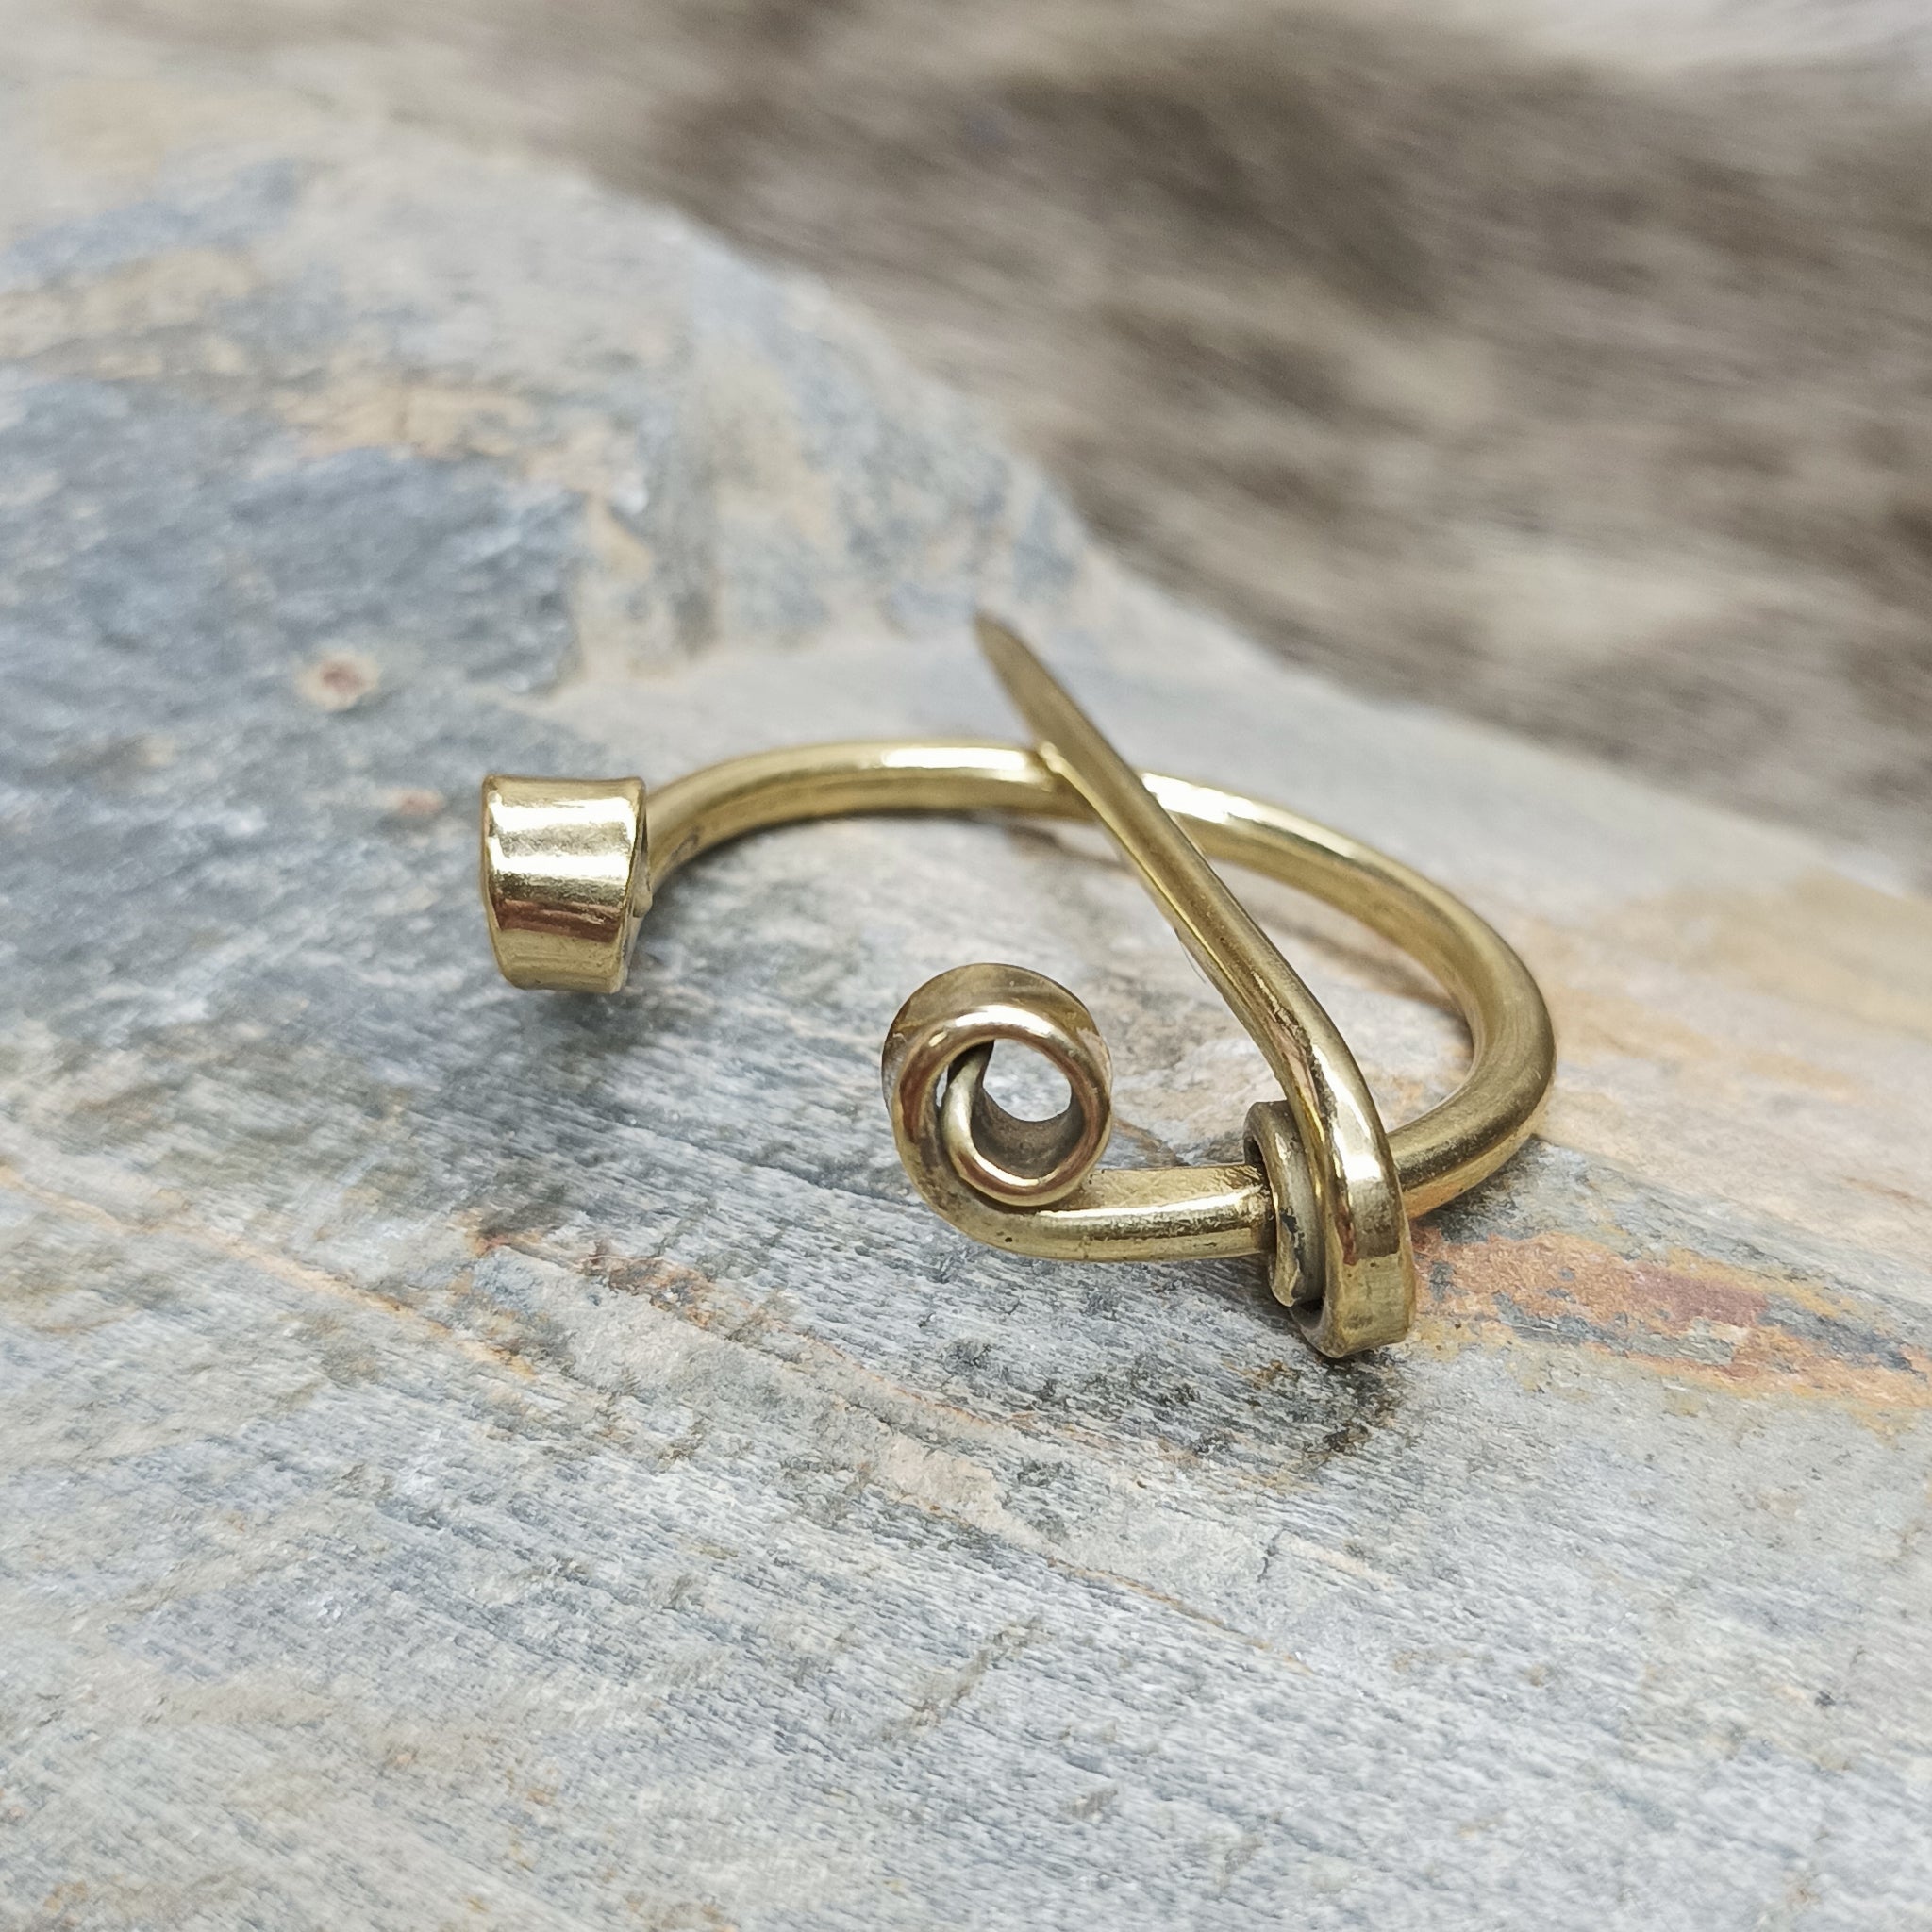 30mm Brass Cloak Pin / Clothes Pin on Rock - Side Angle View